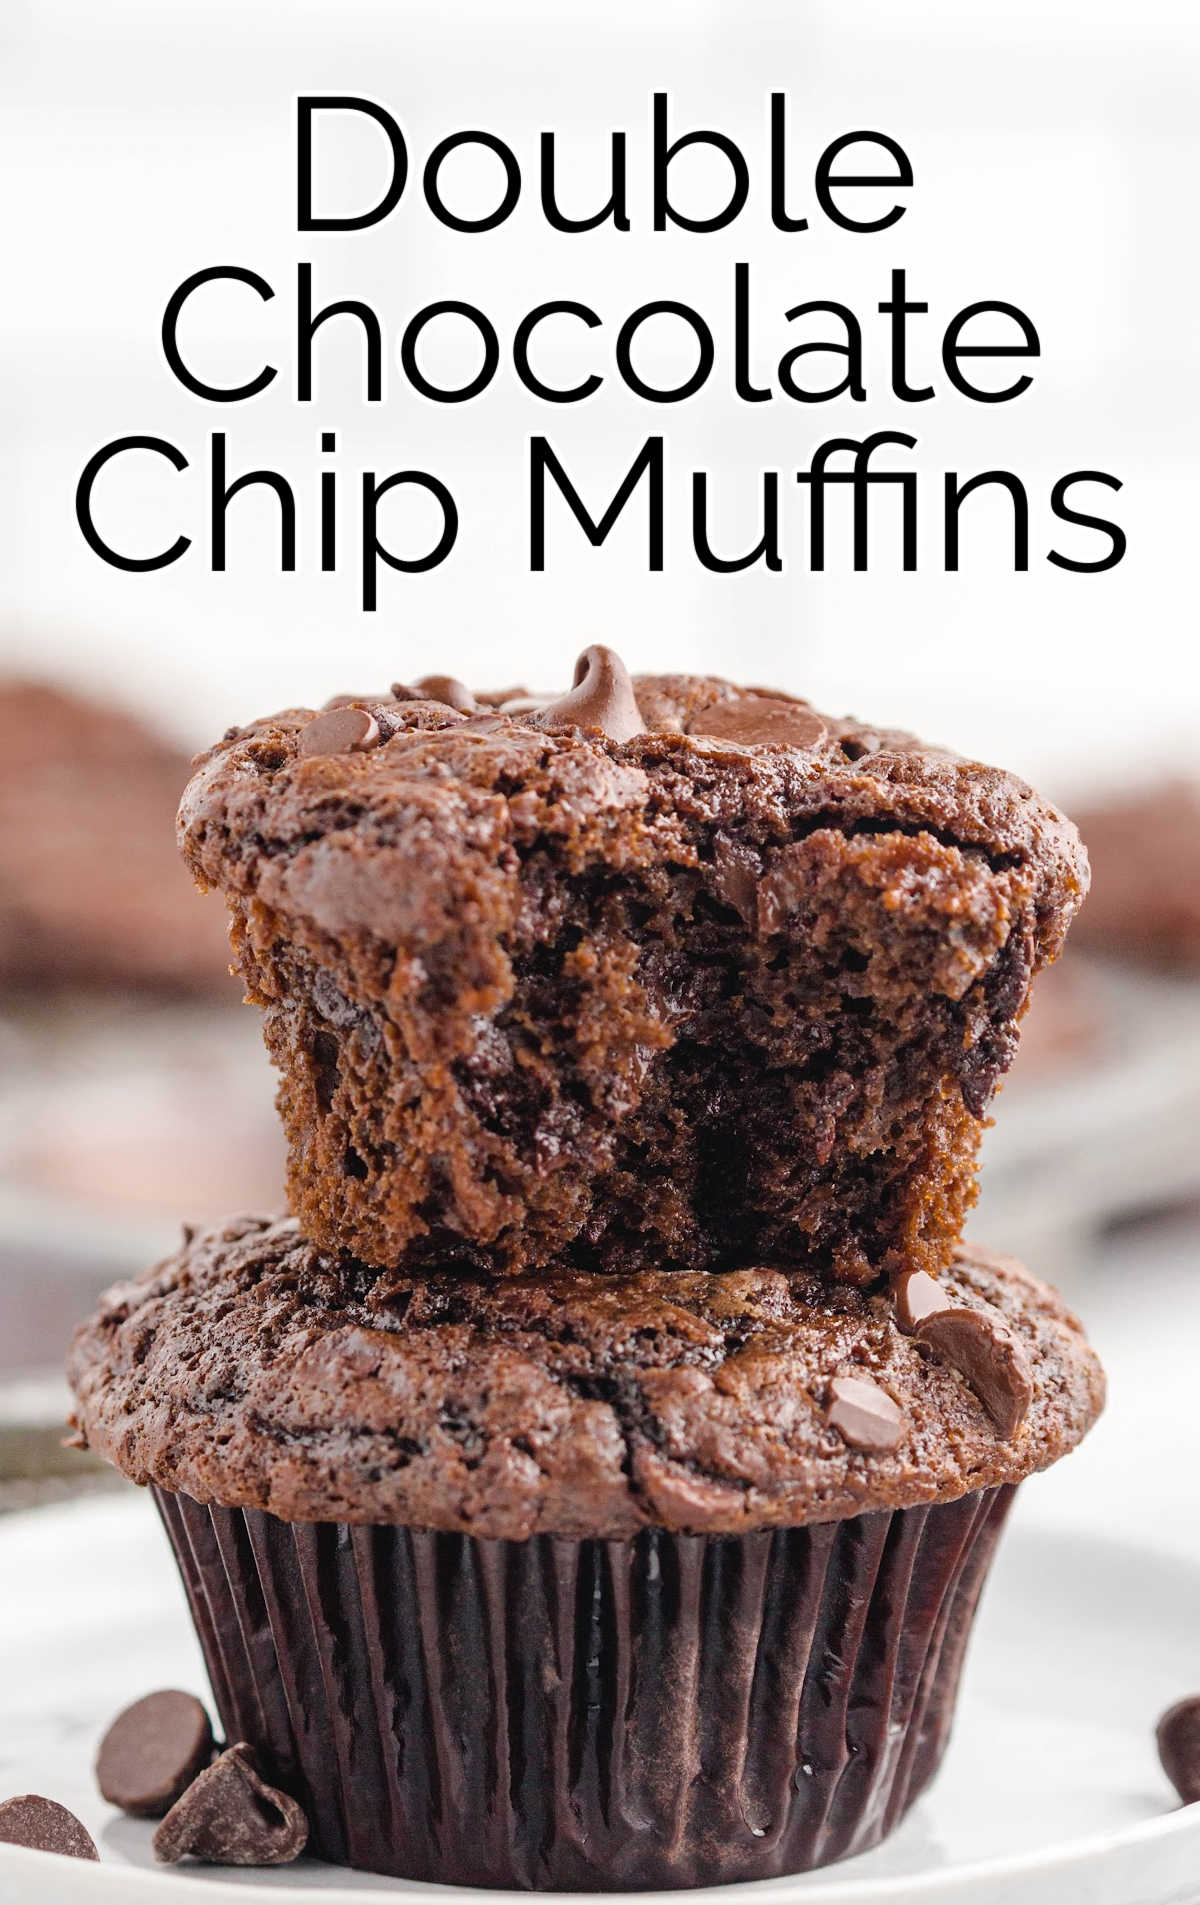 Double Chocolate Chip Muffins stacked on top each other